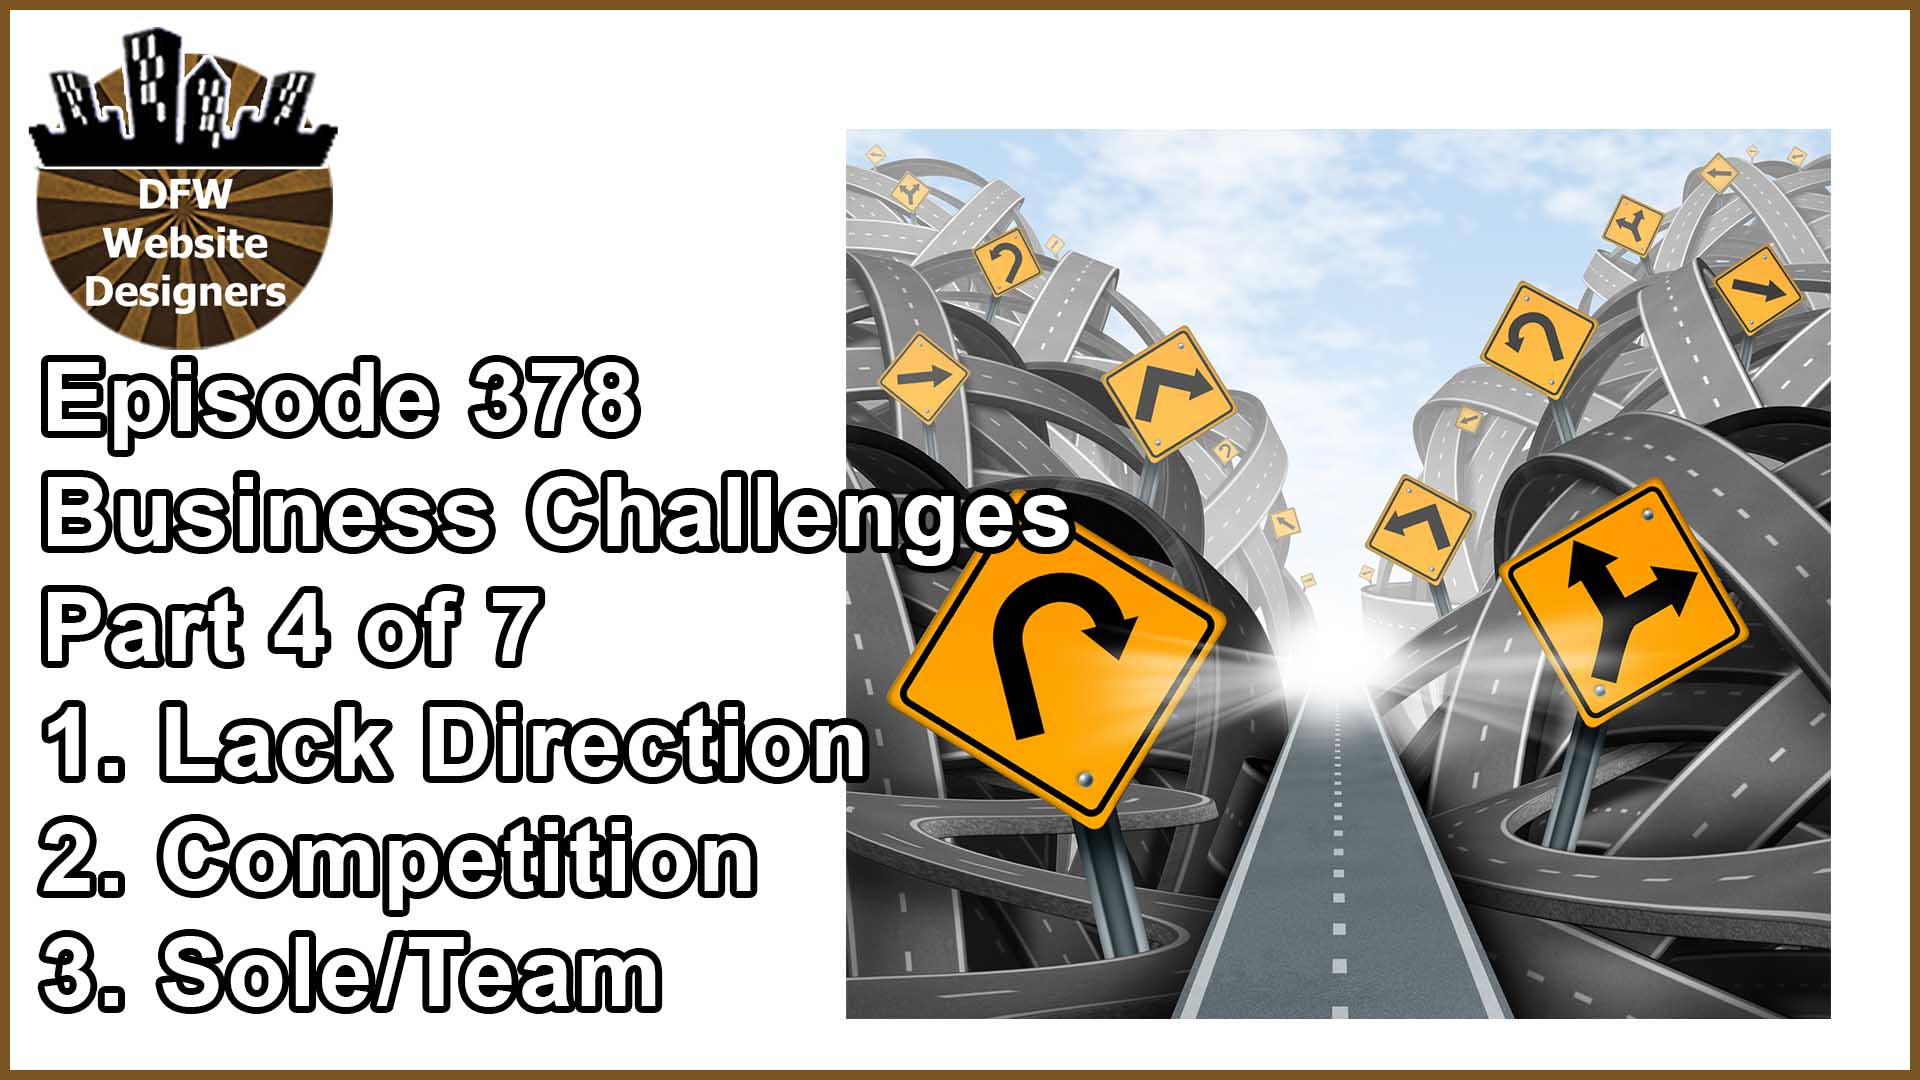 Episode 378 Business Challenges Pt4: Direction, Competition, Solo vs Team